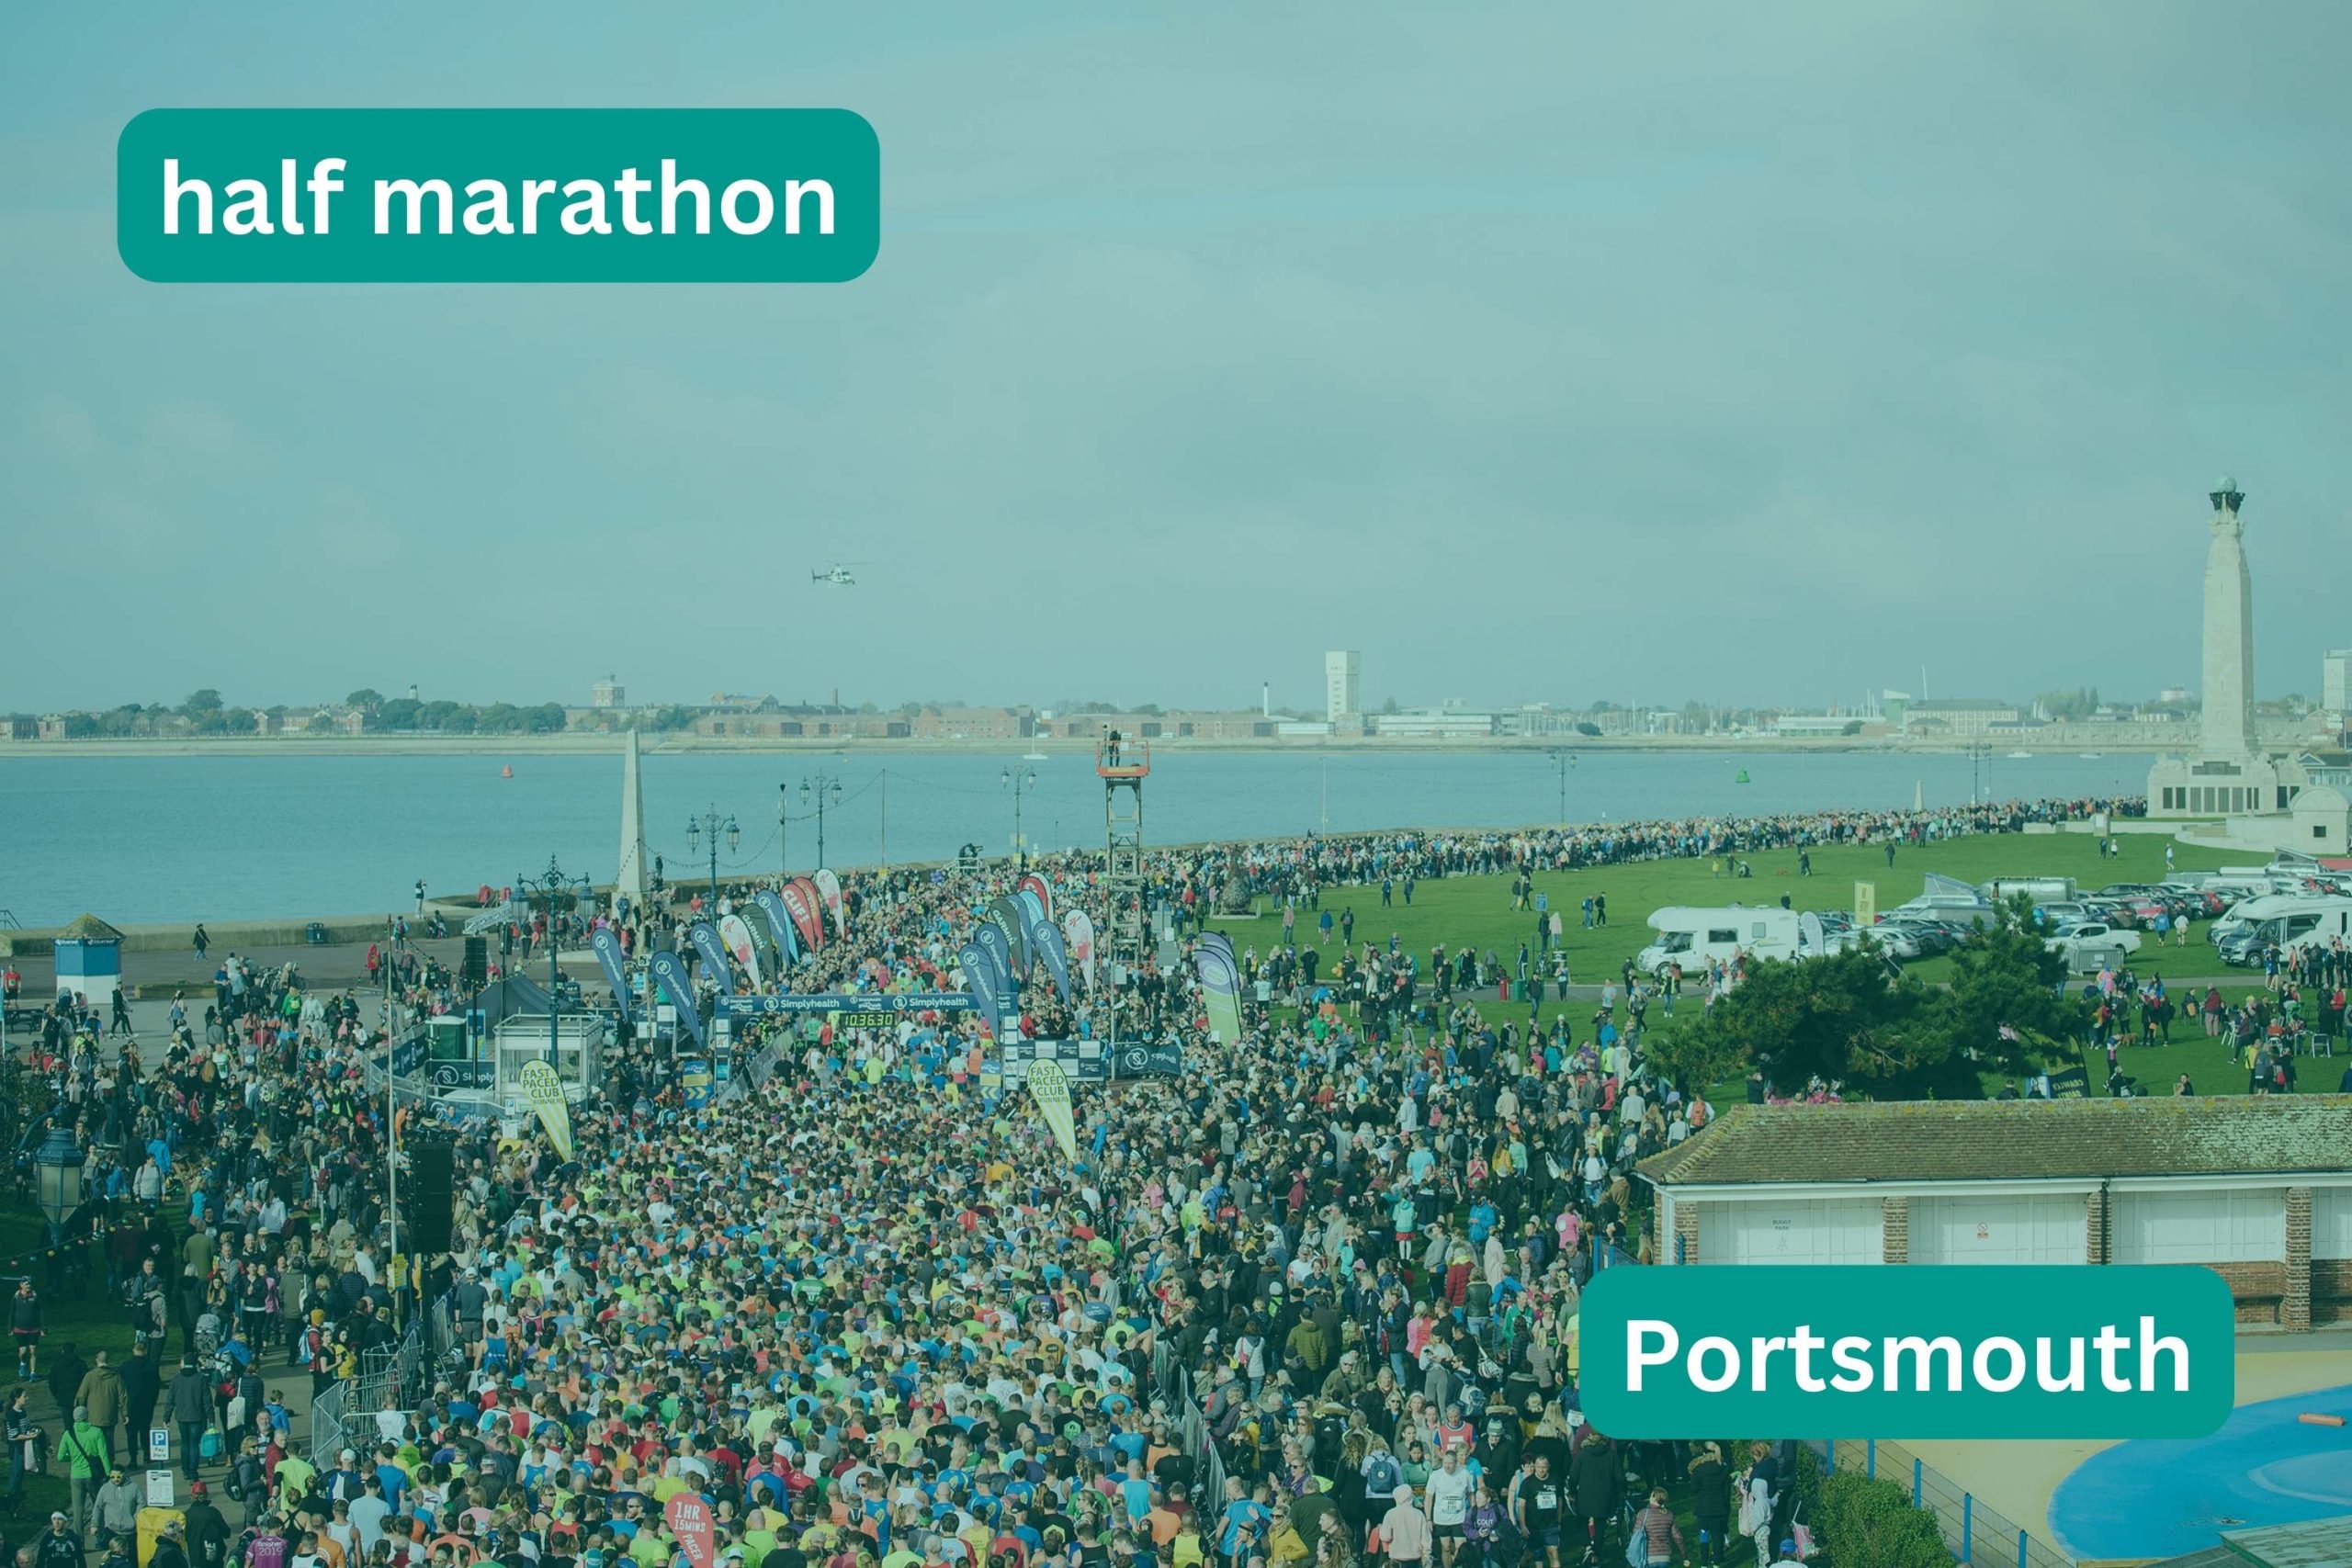 prominade of Portsmouth filled with runners. title text half marathon portsmouth